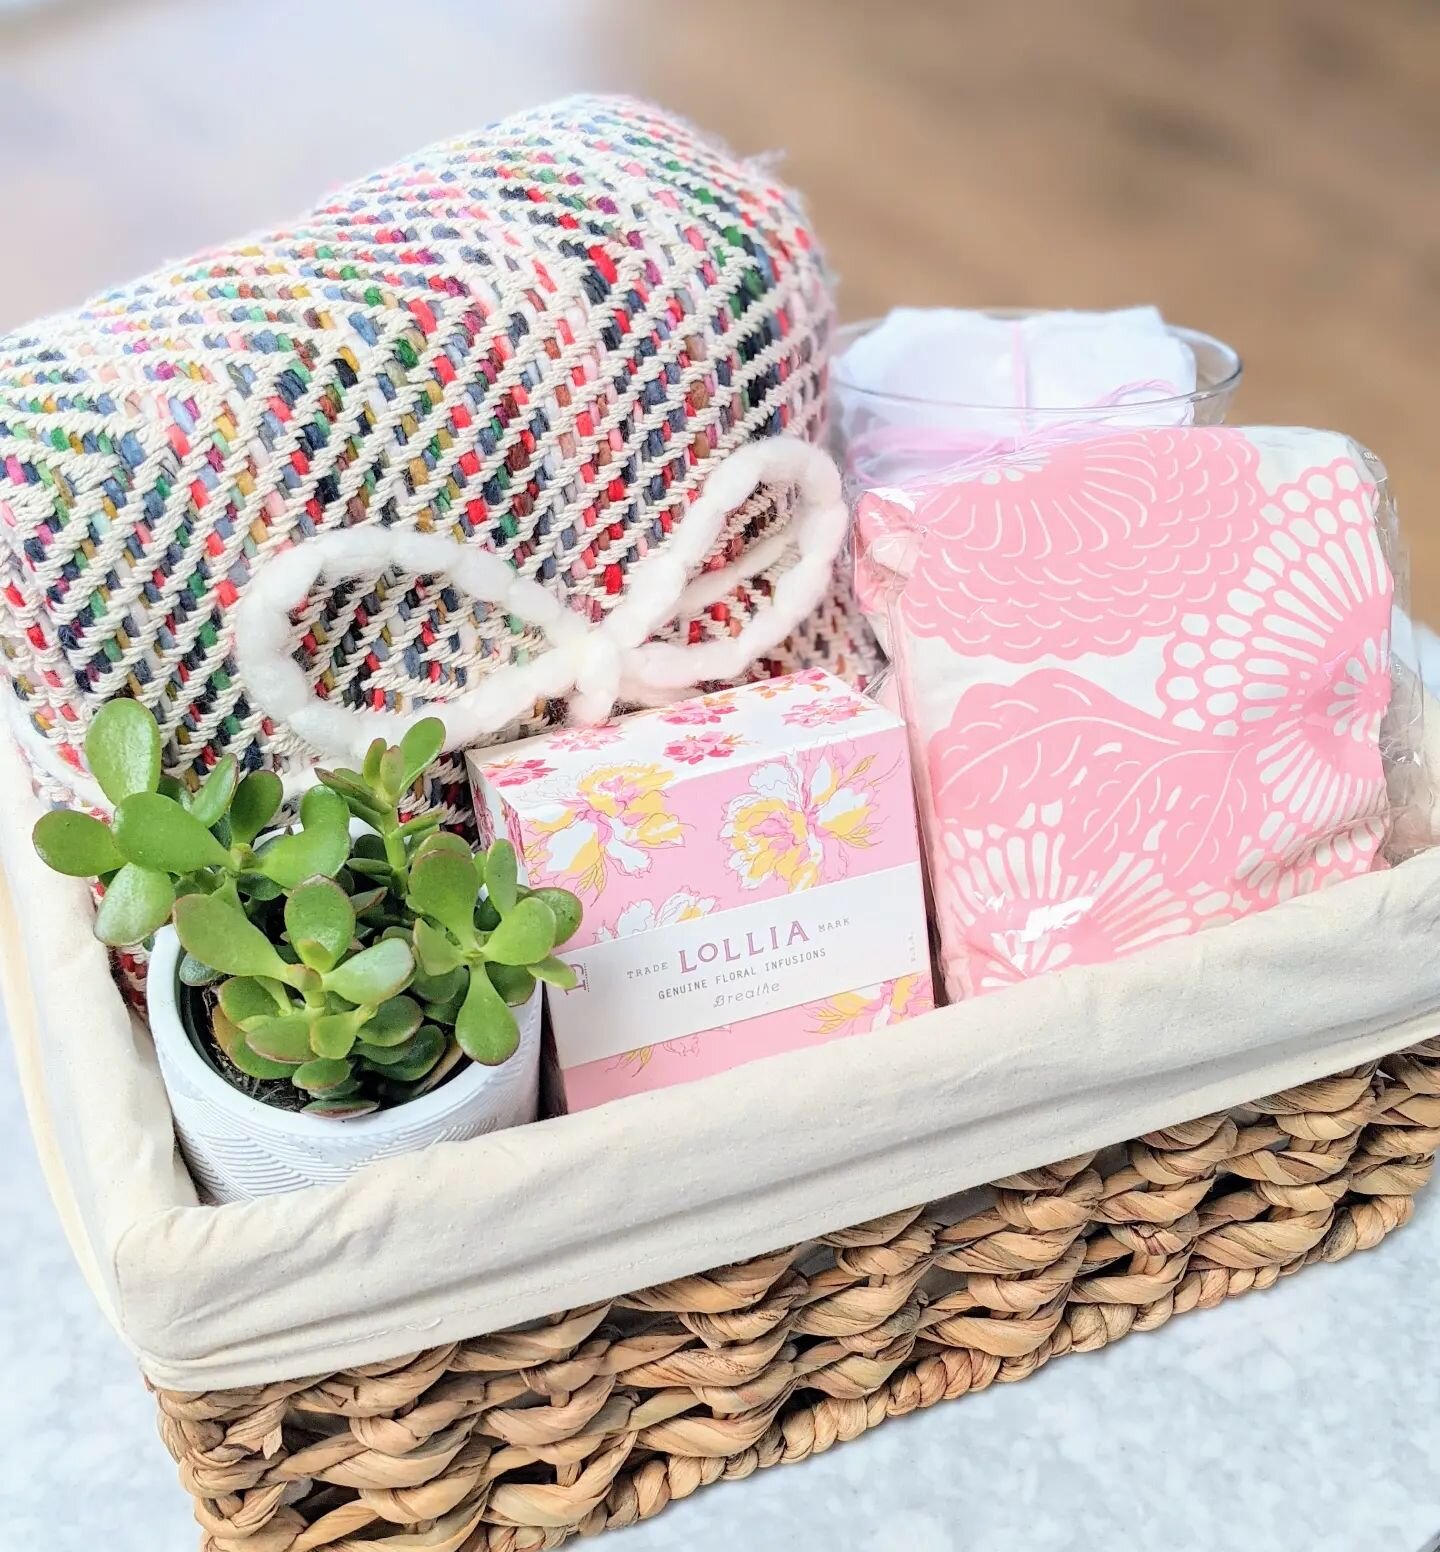 Bow and Bestow specializes in providing curated gifts for life's ups AND downs.

This basket was lovingly assembled for a sweet mama that had just experienced a heartbreaking miscarriage. It included cozy self-care items like a heating pad and a blan